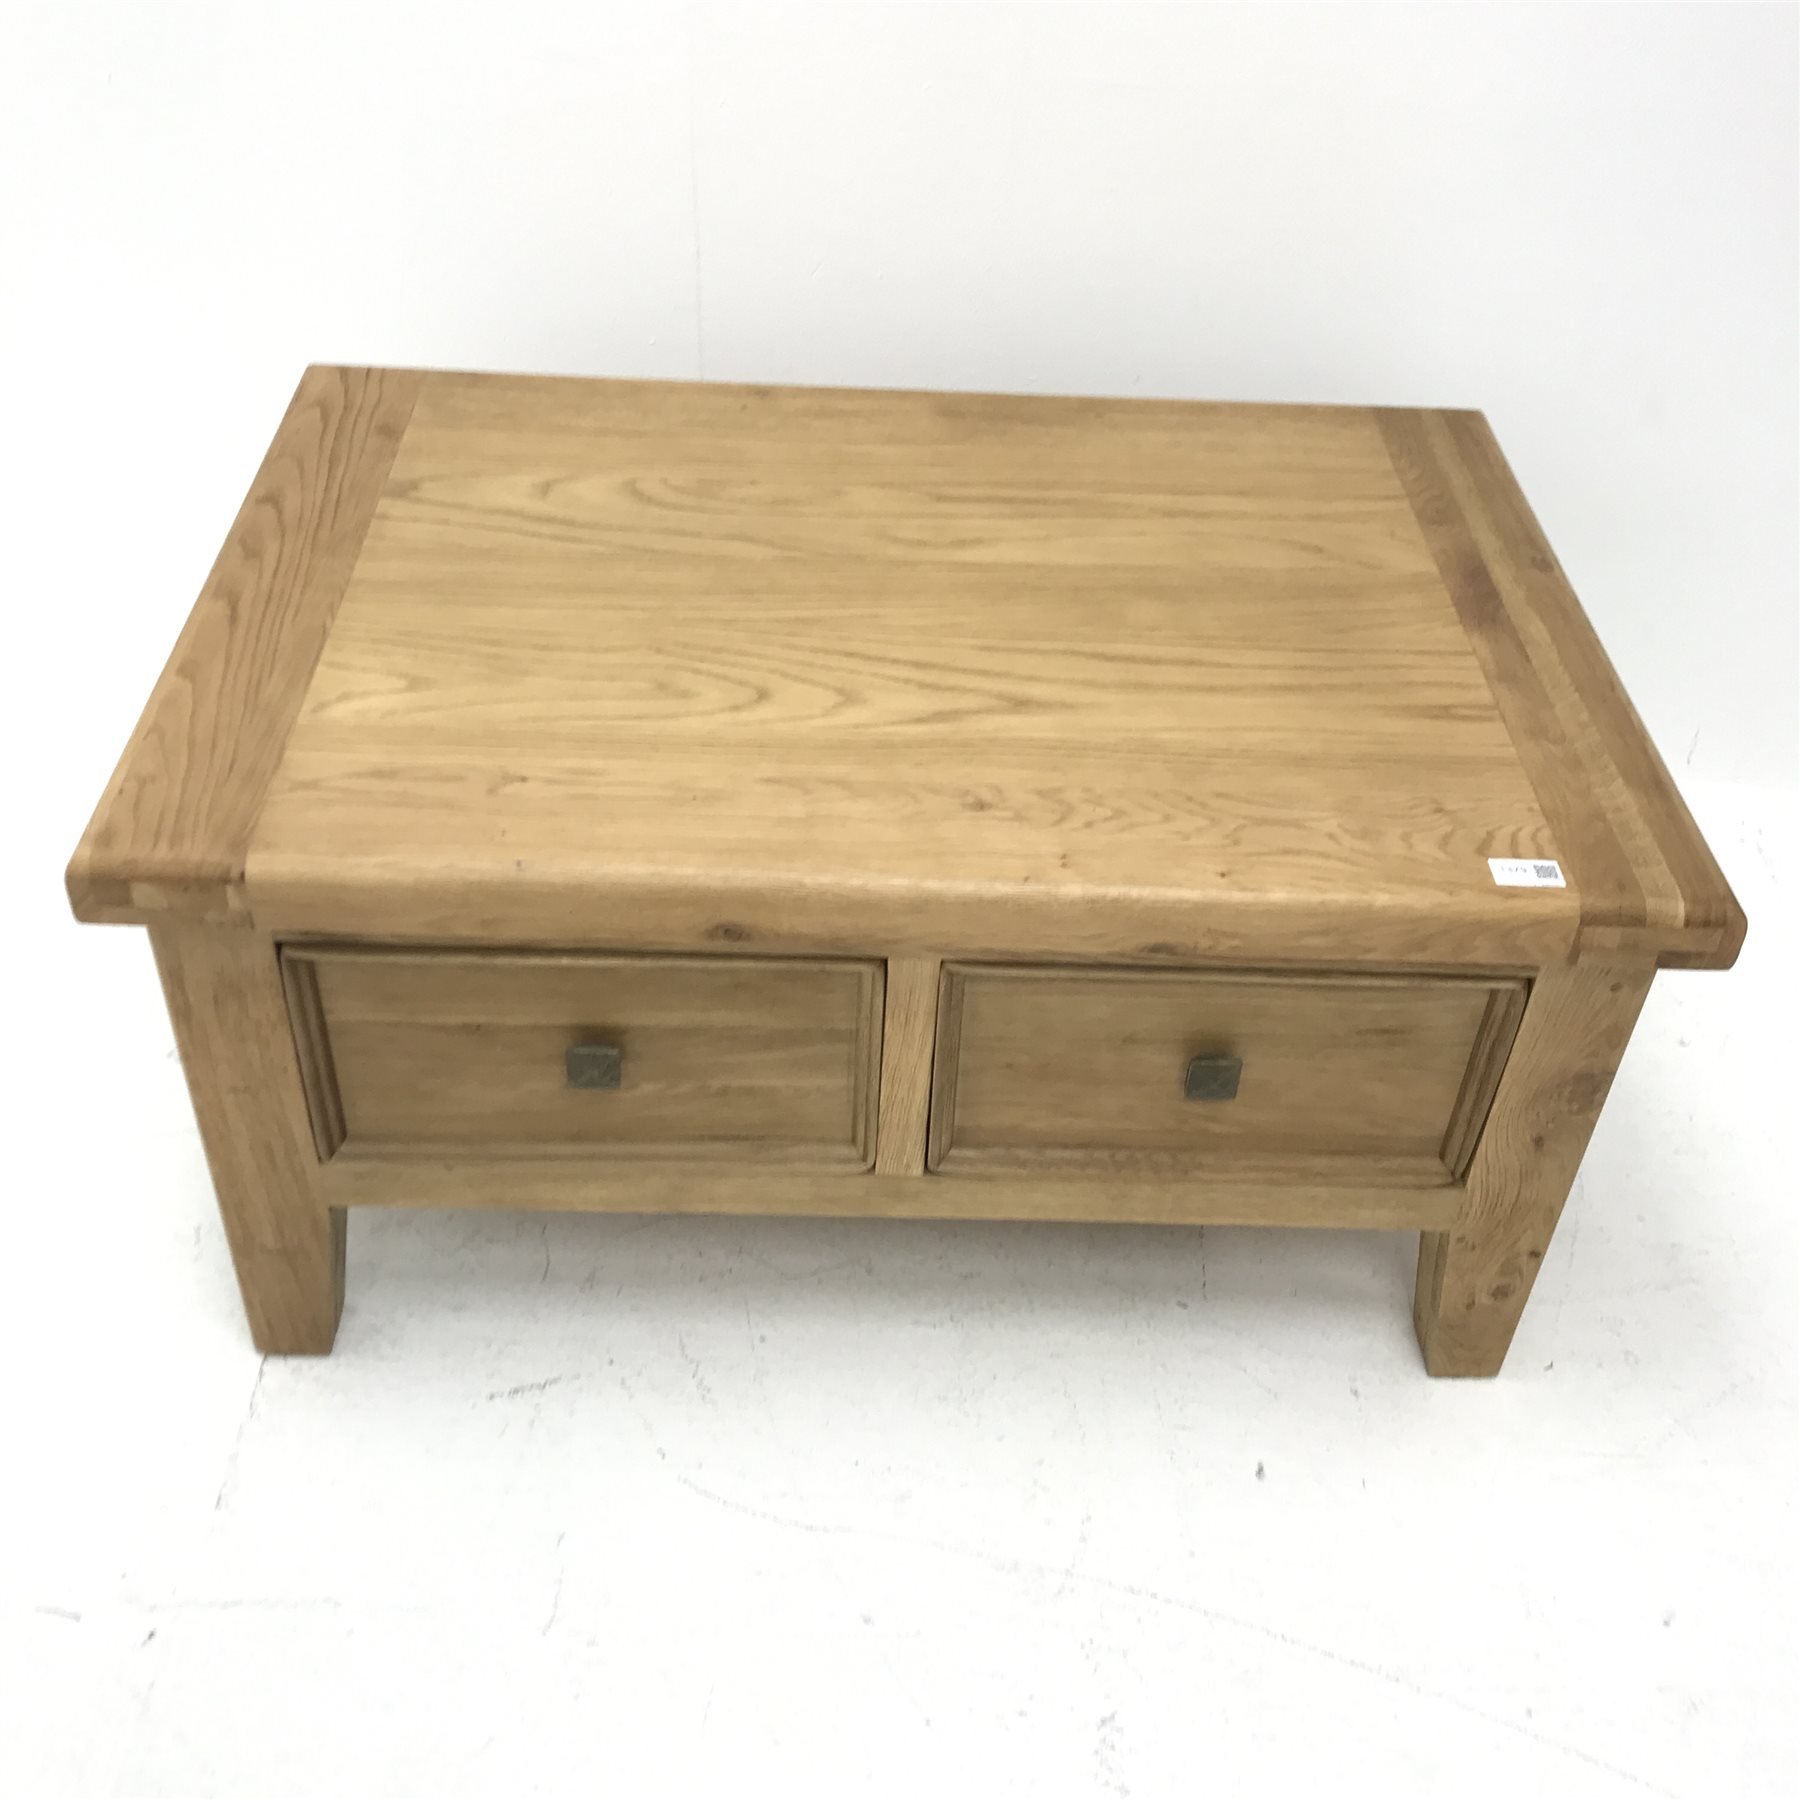 Rectangular oak coffee table with two through drawers, 90cm x 60cm, H45cm - Image 2 of 5